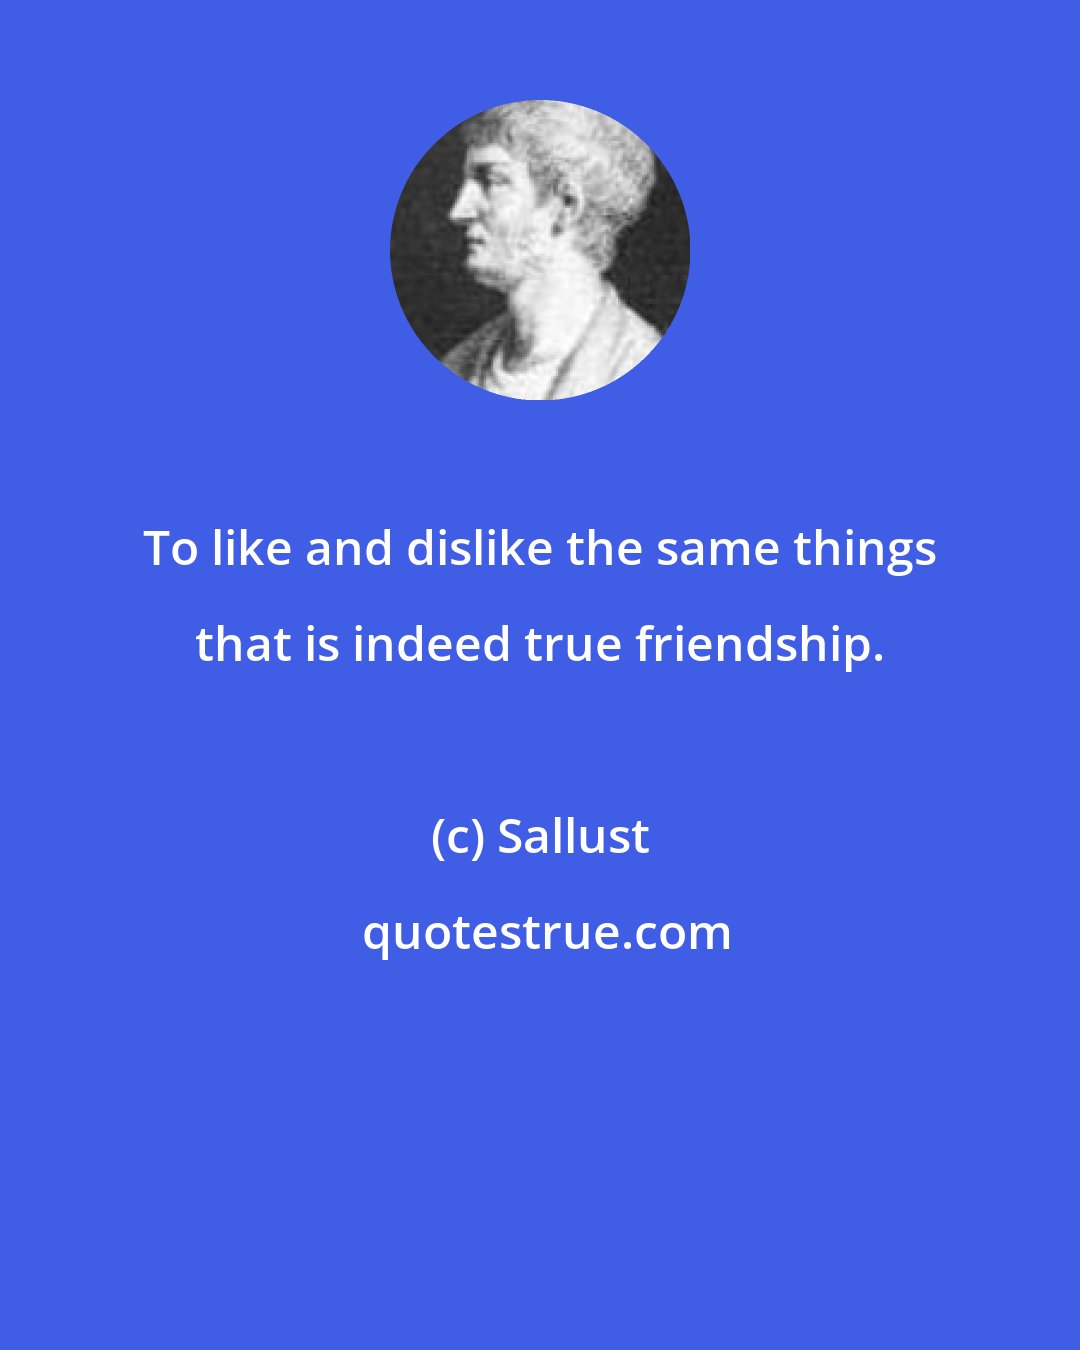 Sallust: To like and dislike the same things that is indeed true friendship.